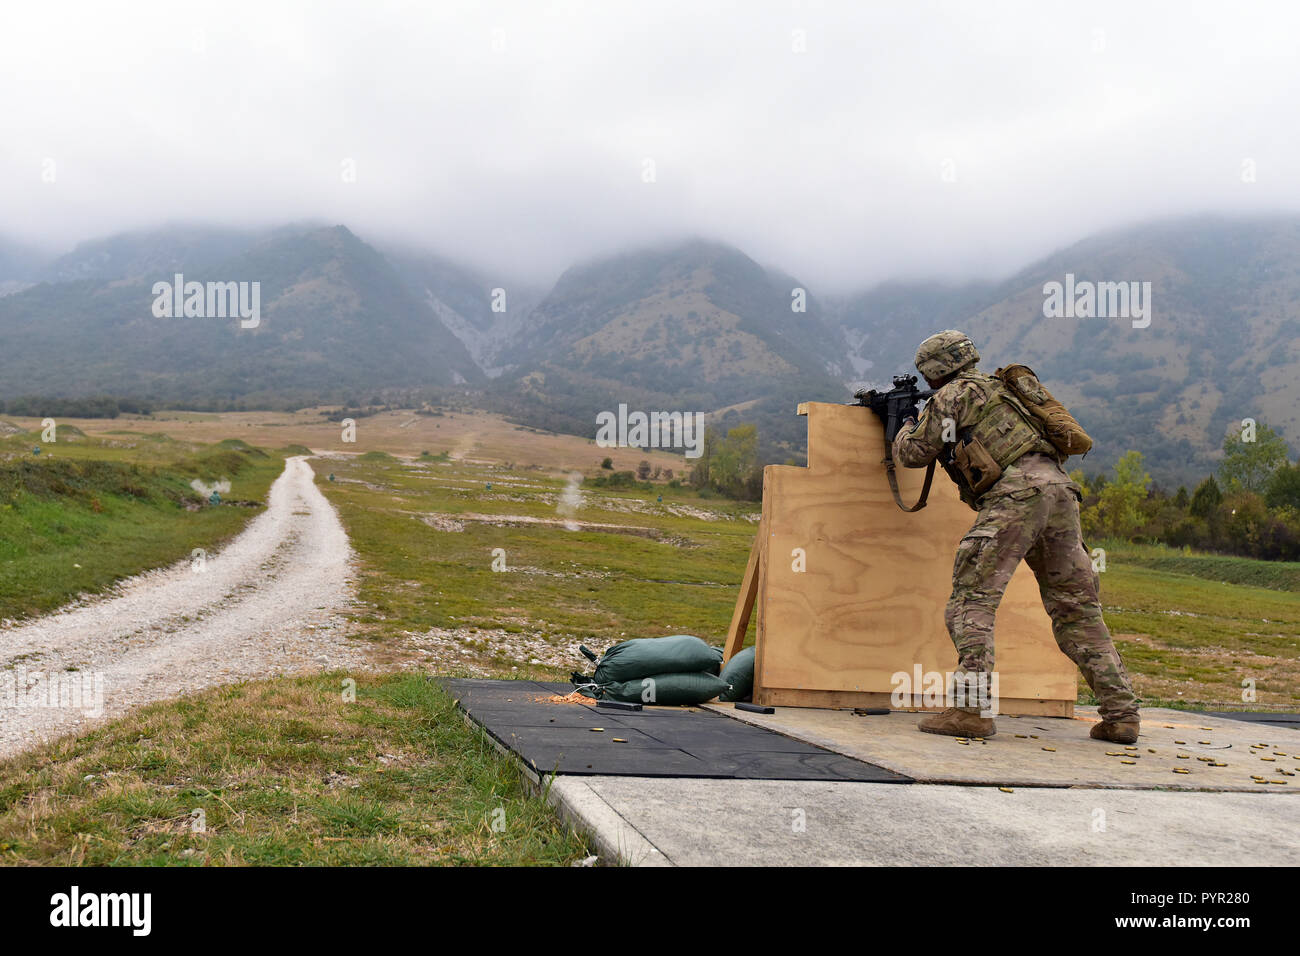 U.S. Army Paratrooper assigned to the 1st Battalion, 503rd Infantry Regiment, 173rd Airborne Brigade engages a pop-up targets with M4 carbine during the marksmanship training at Cao Malnisio Range, Pordenone, Italy, Oct. 25, 2018. The 173rd Airborne Brigade is the U.S. Army Contingency Response Force in Europe, capable of projecting ready forces anywhere in the U.S. European, Africa or Central Commands' areas of responsibility. (U.S. Army Photos by Paolo Bovo) Stock Photo